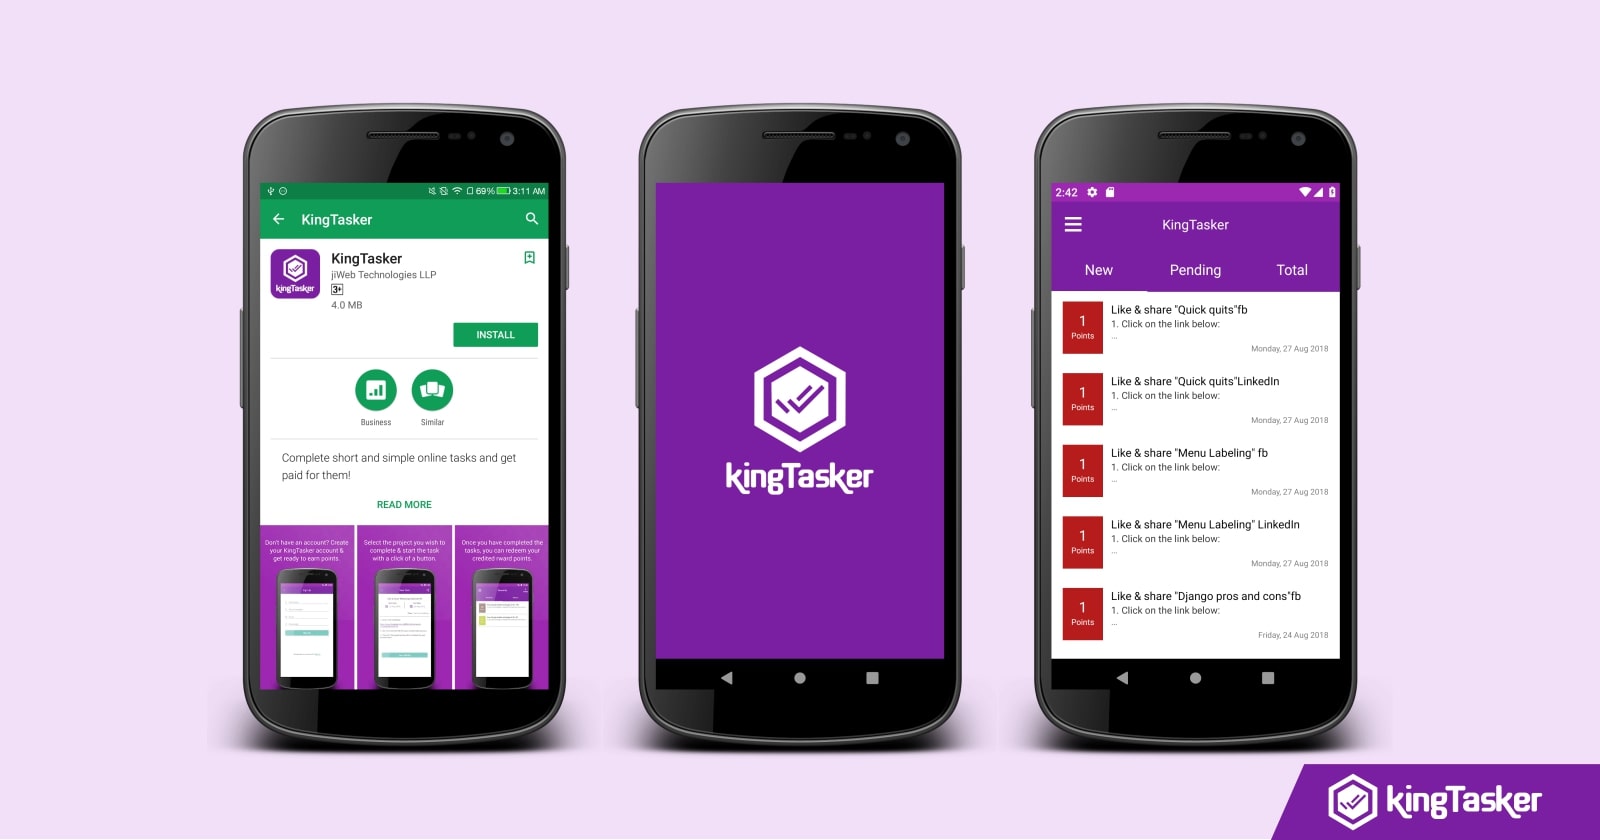 KingTasker Announces the Release of its Mobile Application!